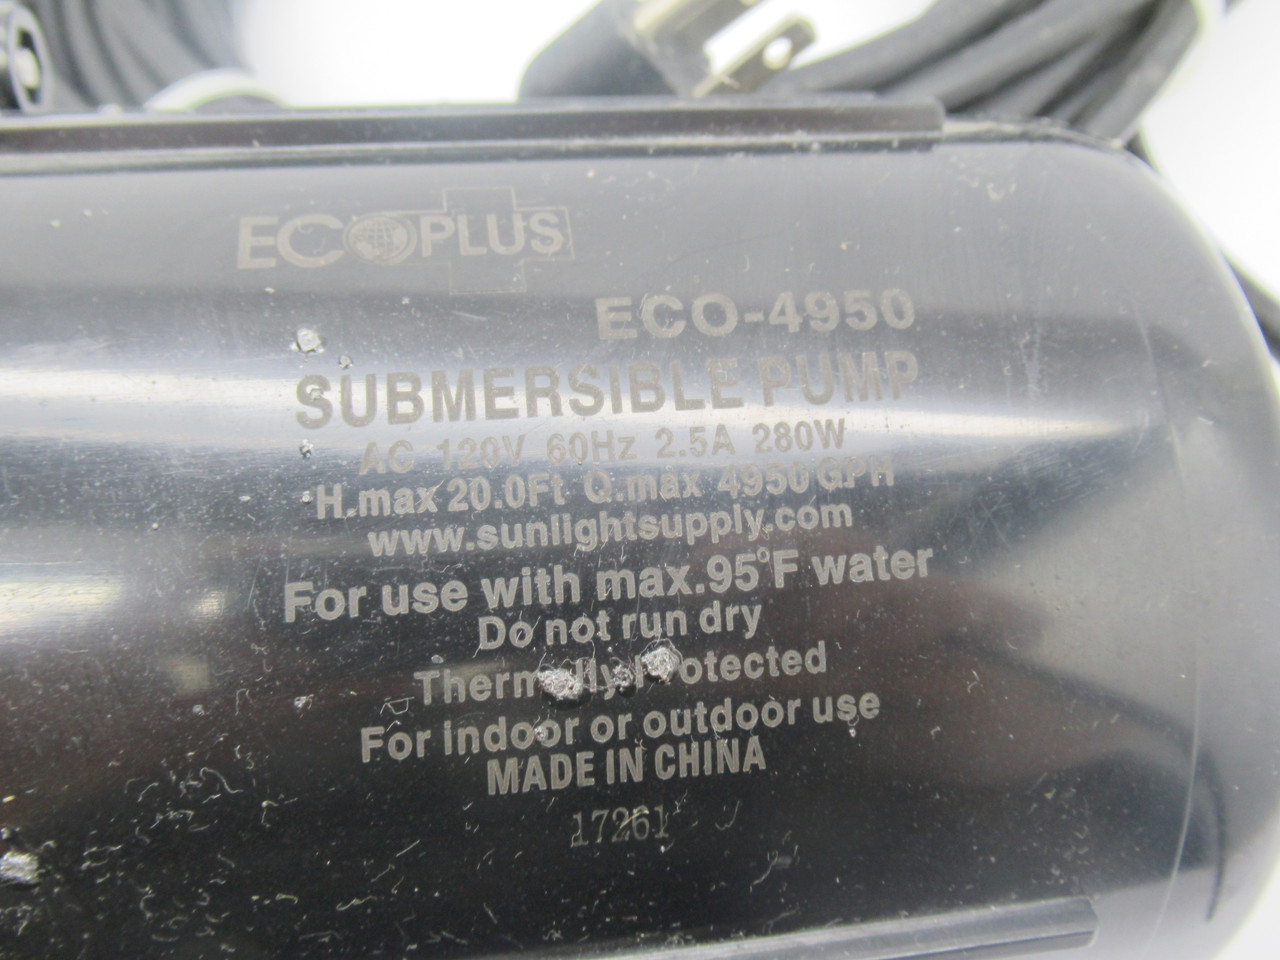 EcoPlus ECO-4950 Submersible Pump 120V 60Hz 2.5A 280W *Missing Accessories* USED